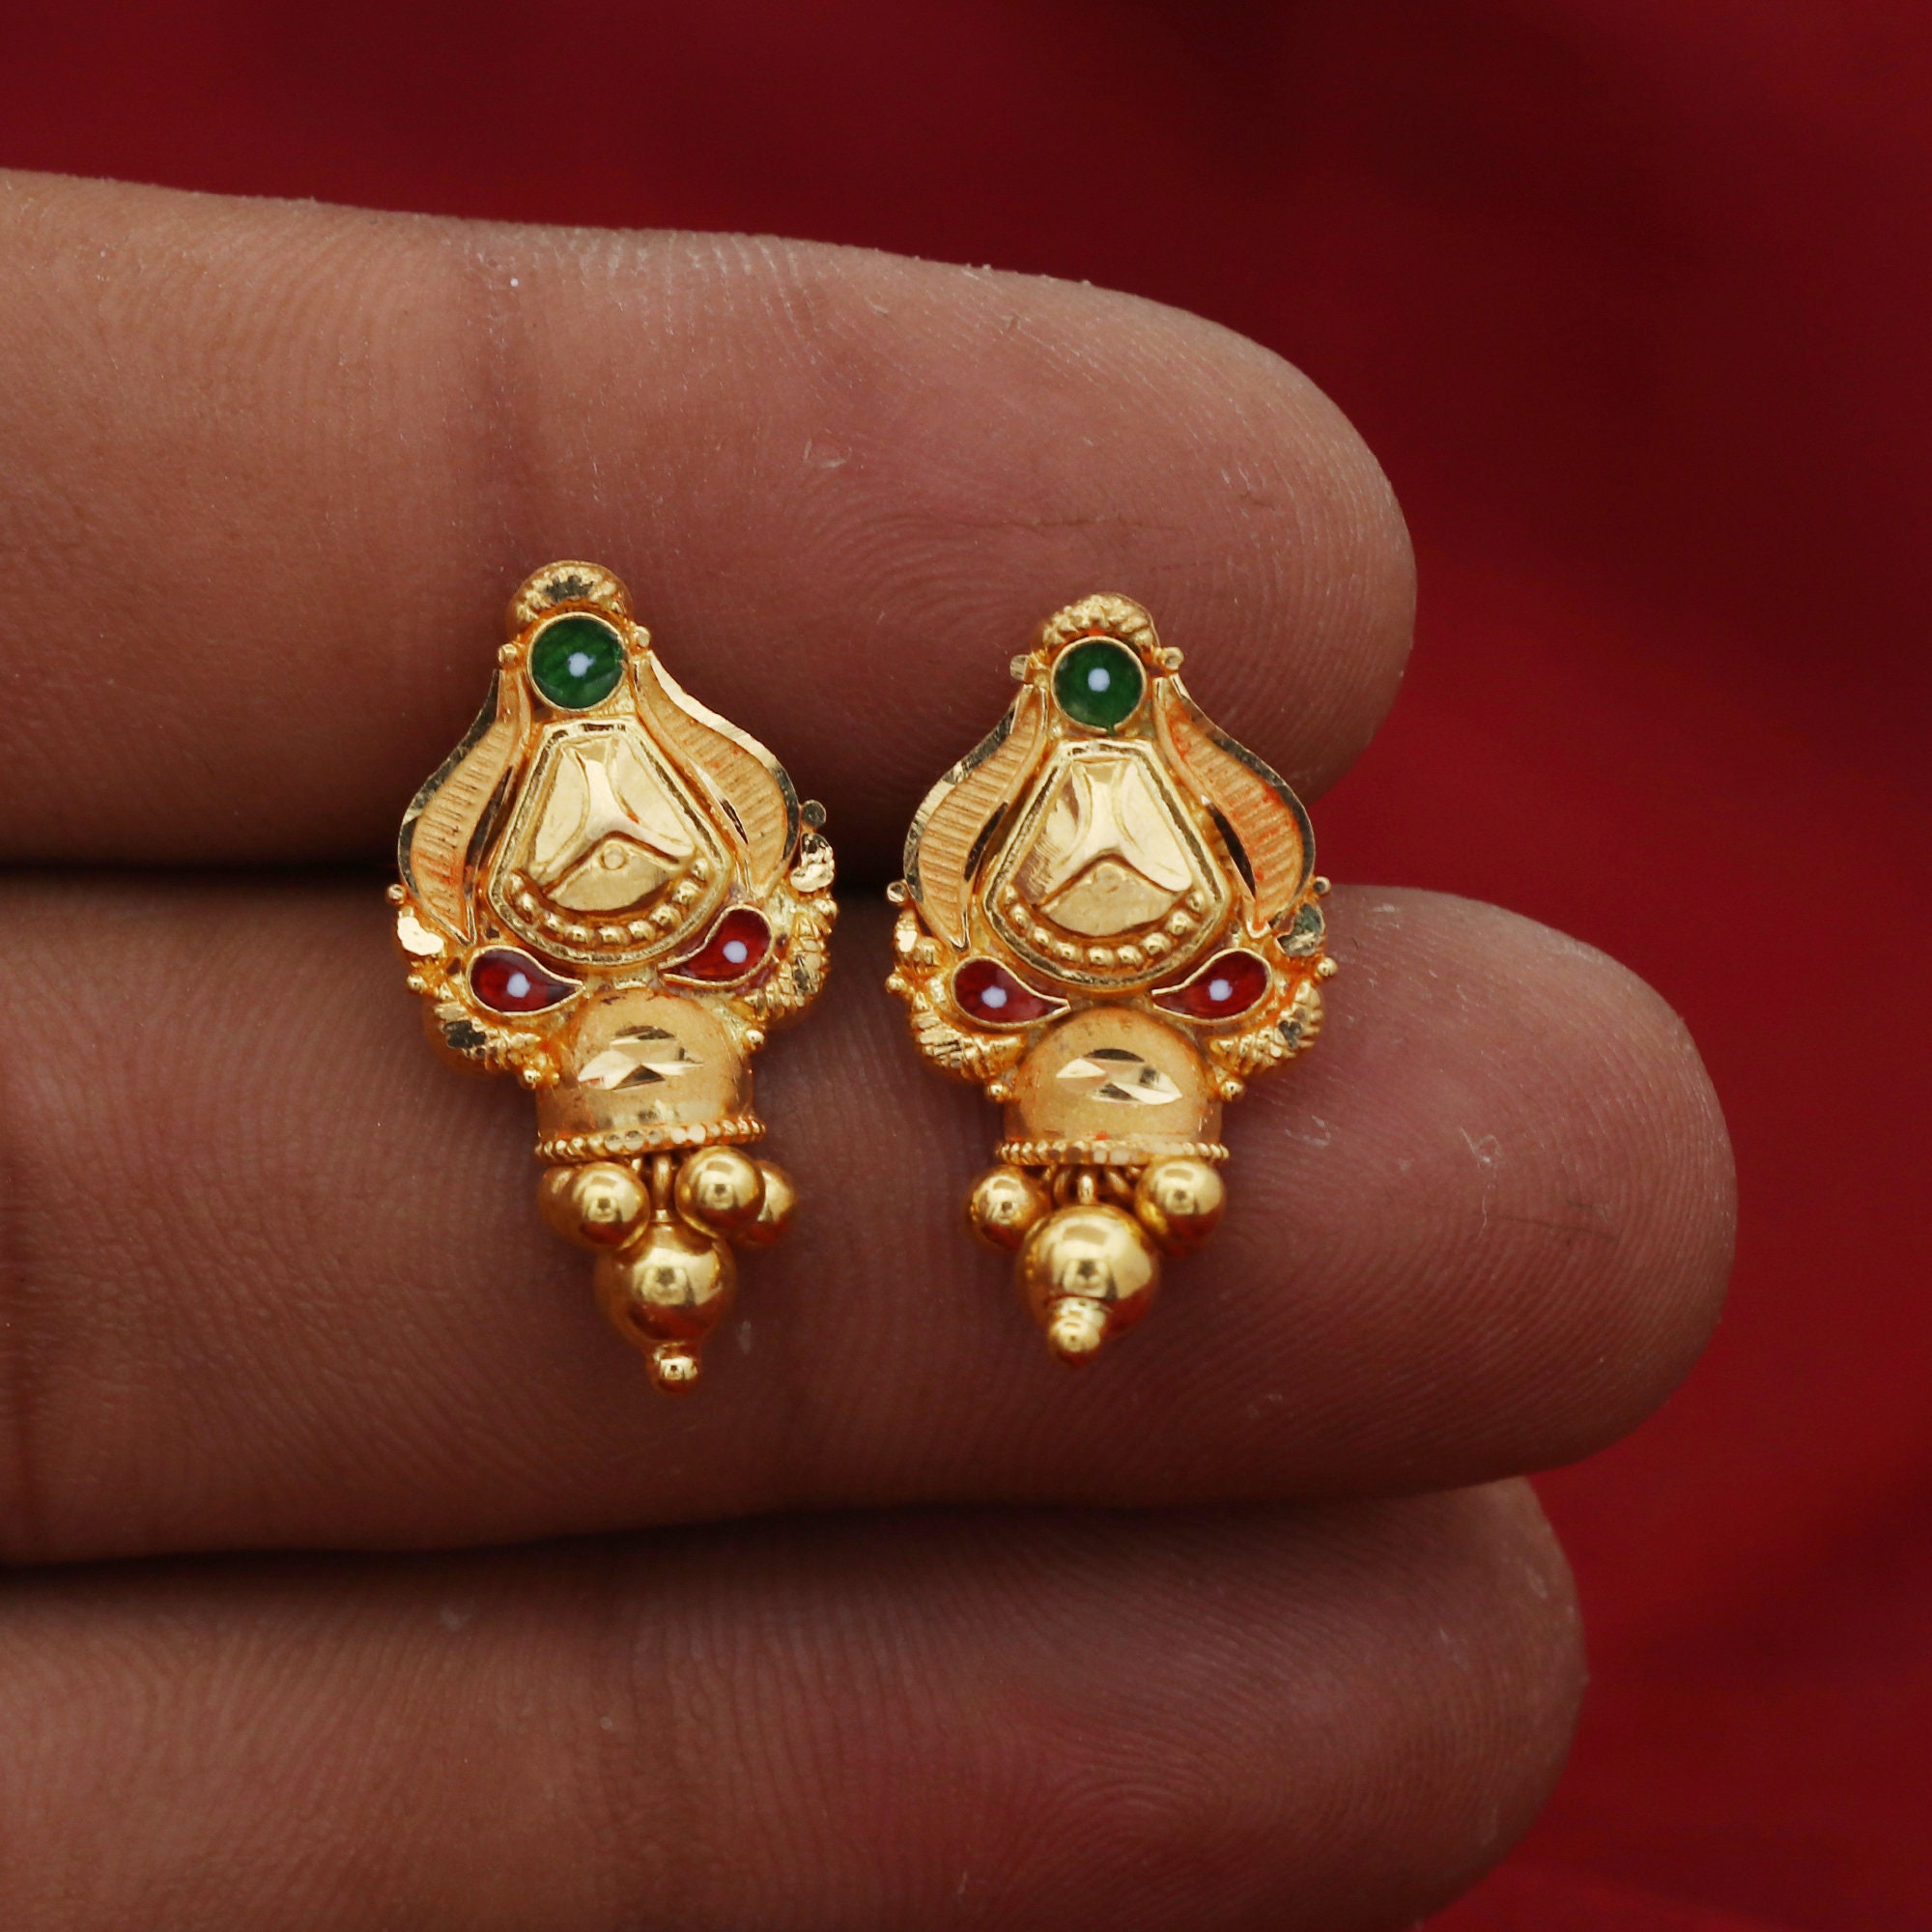 Buy Latest Gold Earrings Designs Online At The Best Price For Women